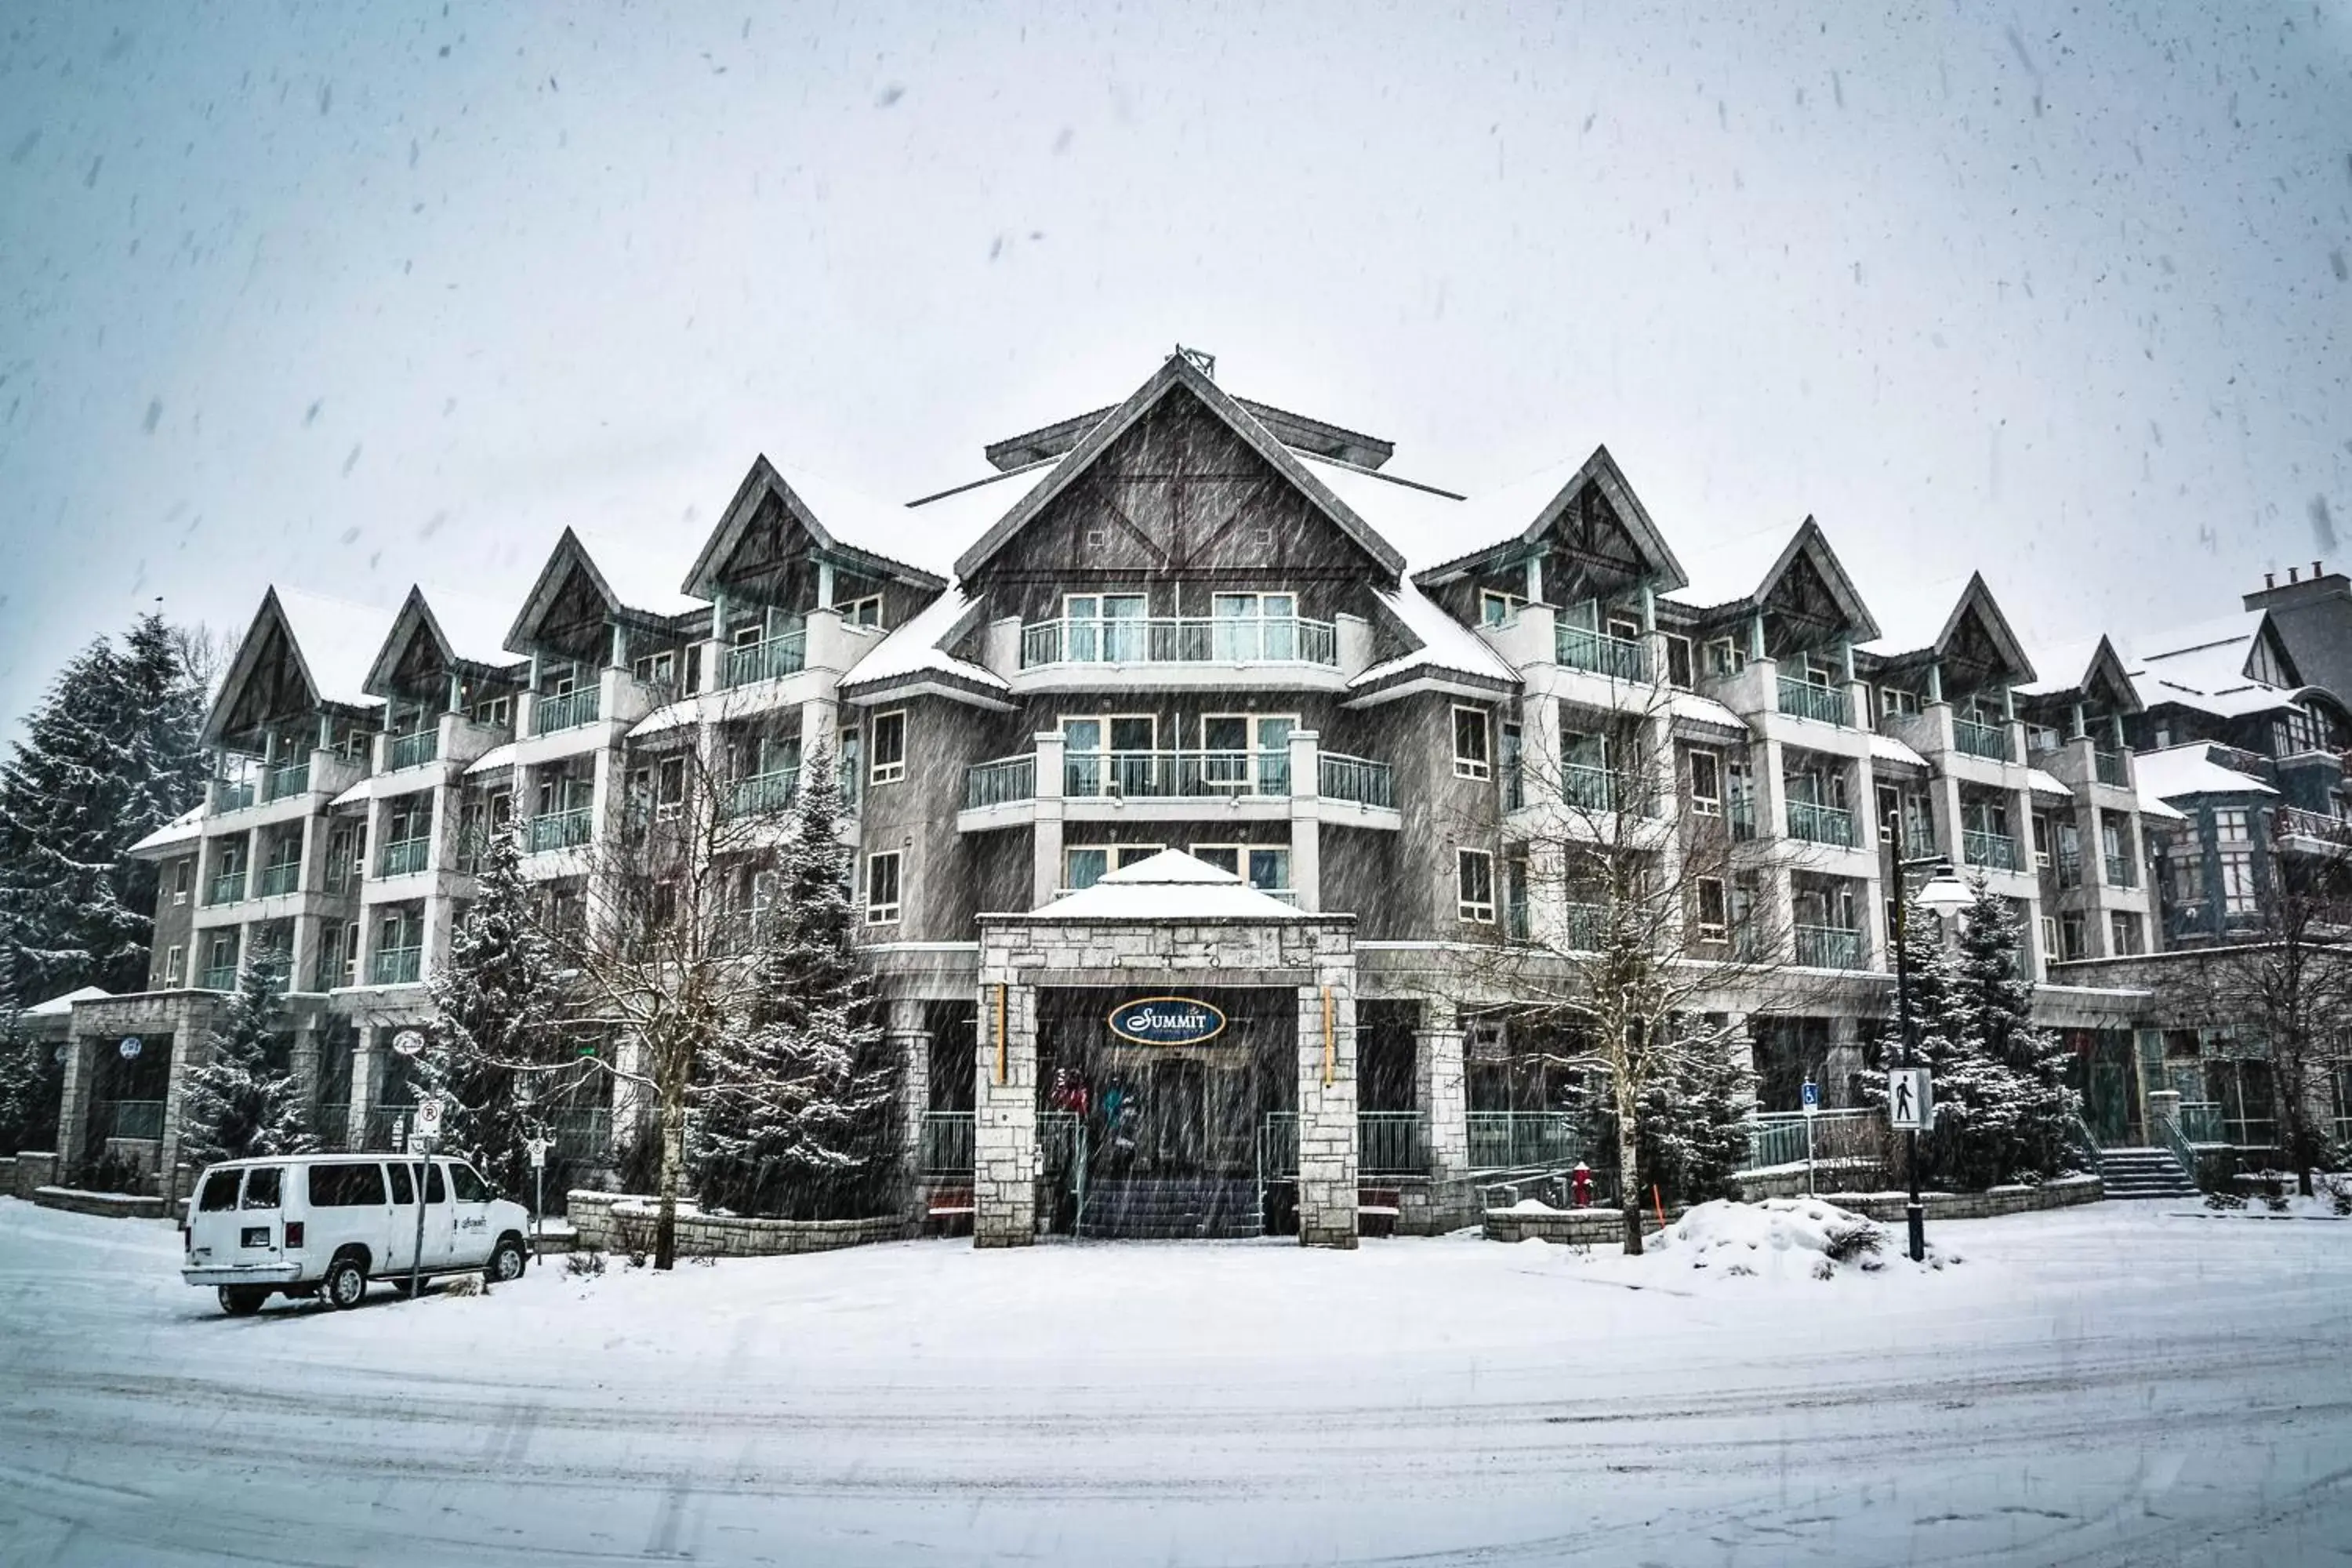 Property building, Winter in Summit Lodge Boutique Hotel Whistler